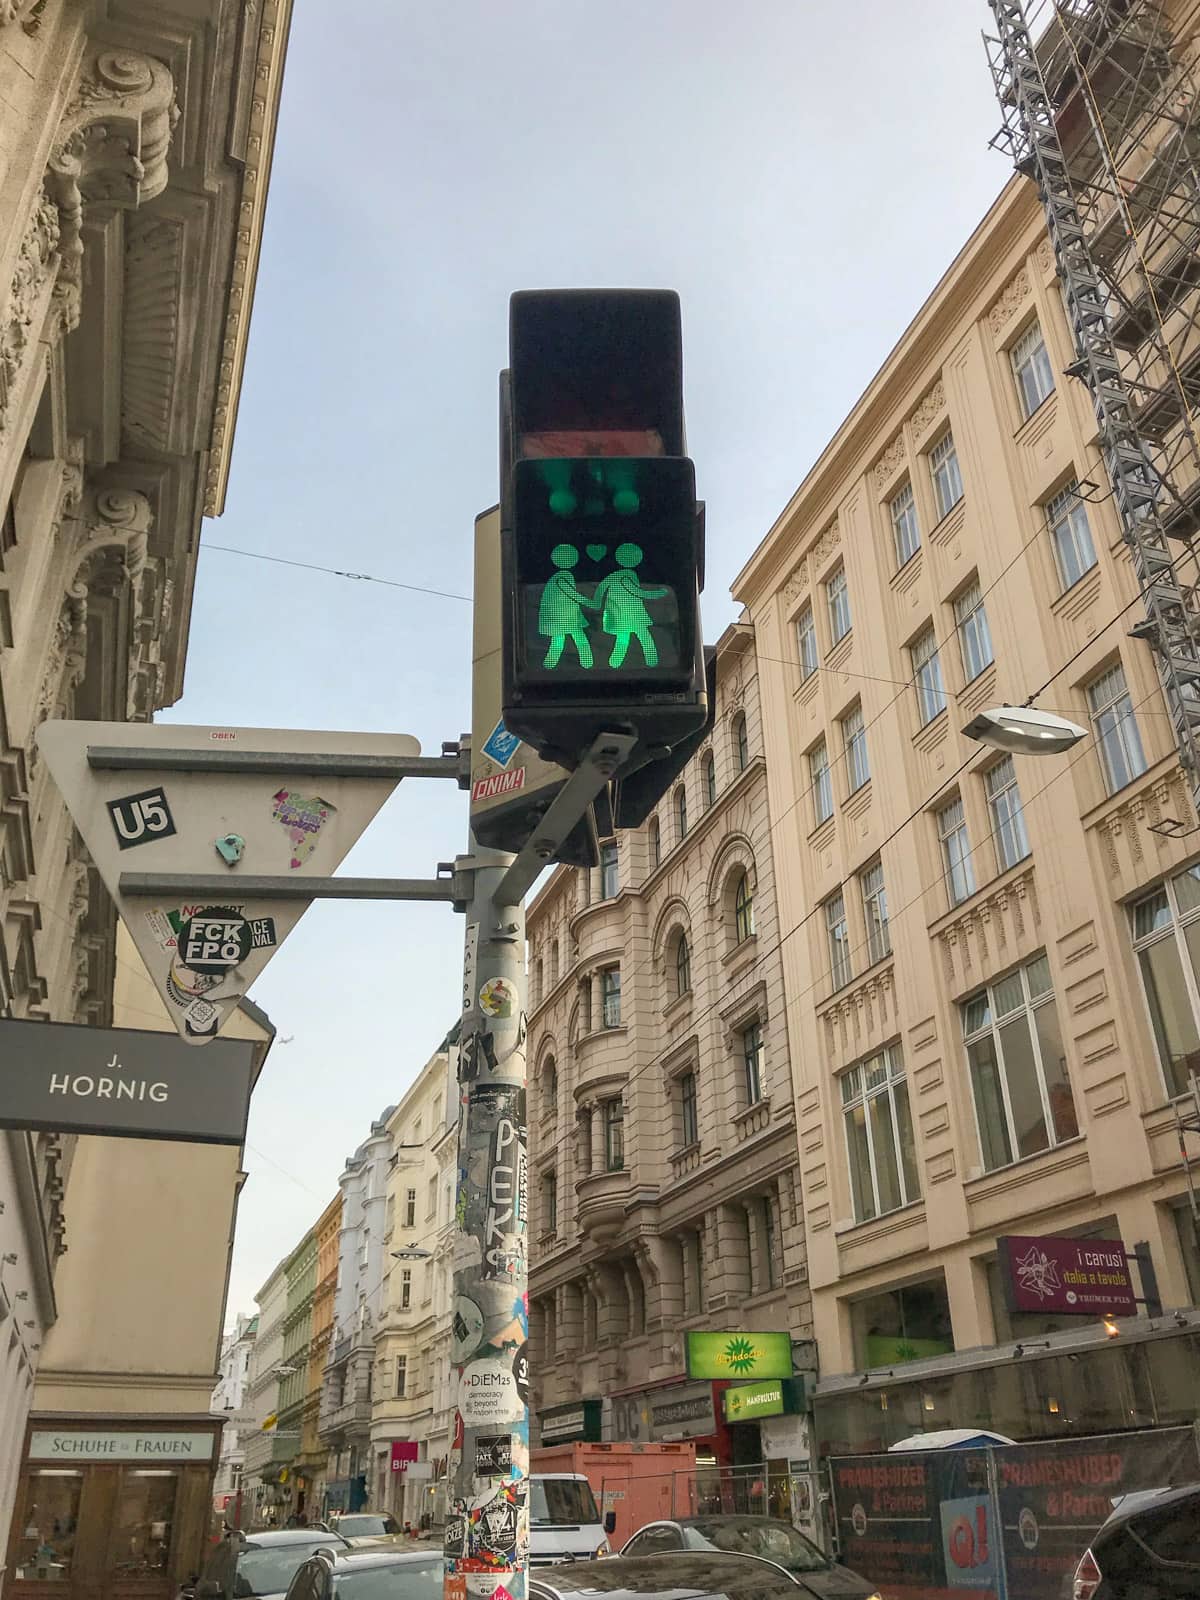 A pedestrian light, lit up in green, showing two female figures holding hands with a heart